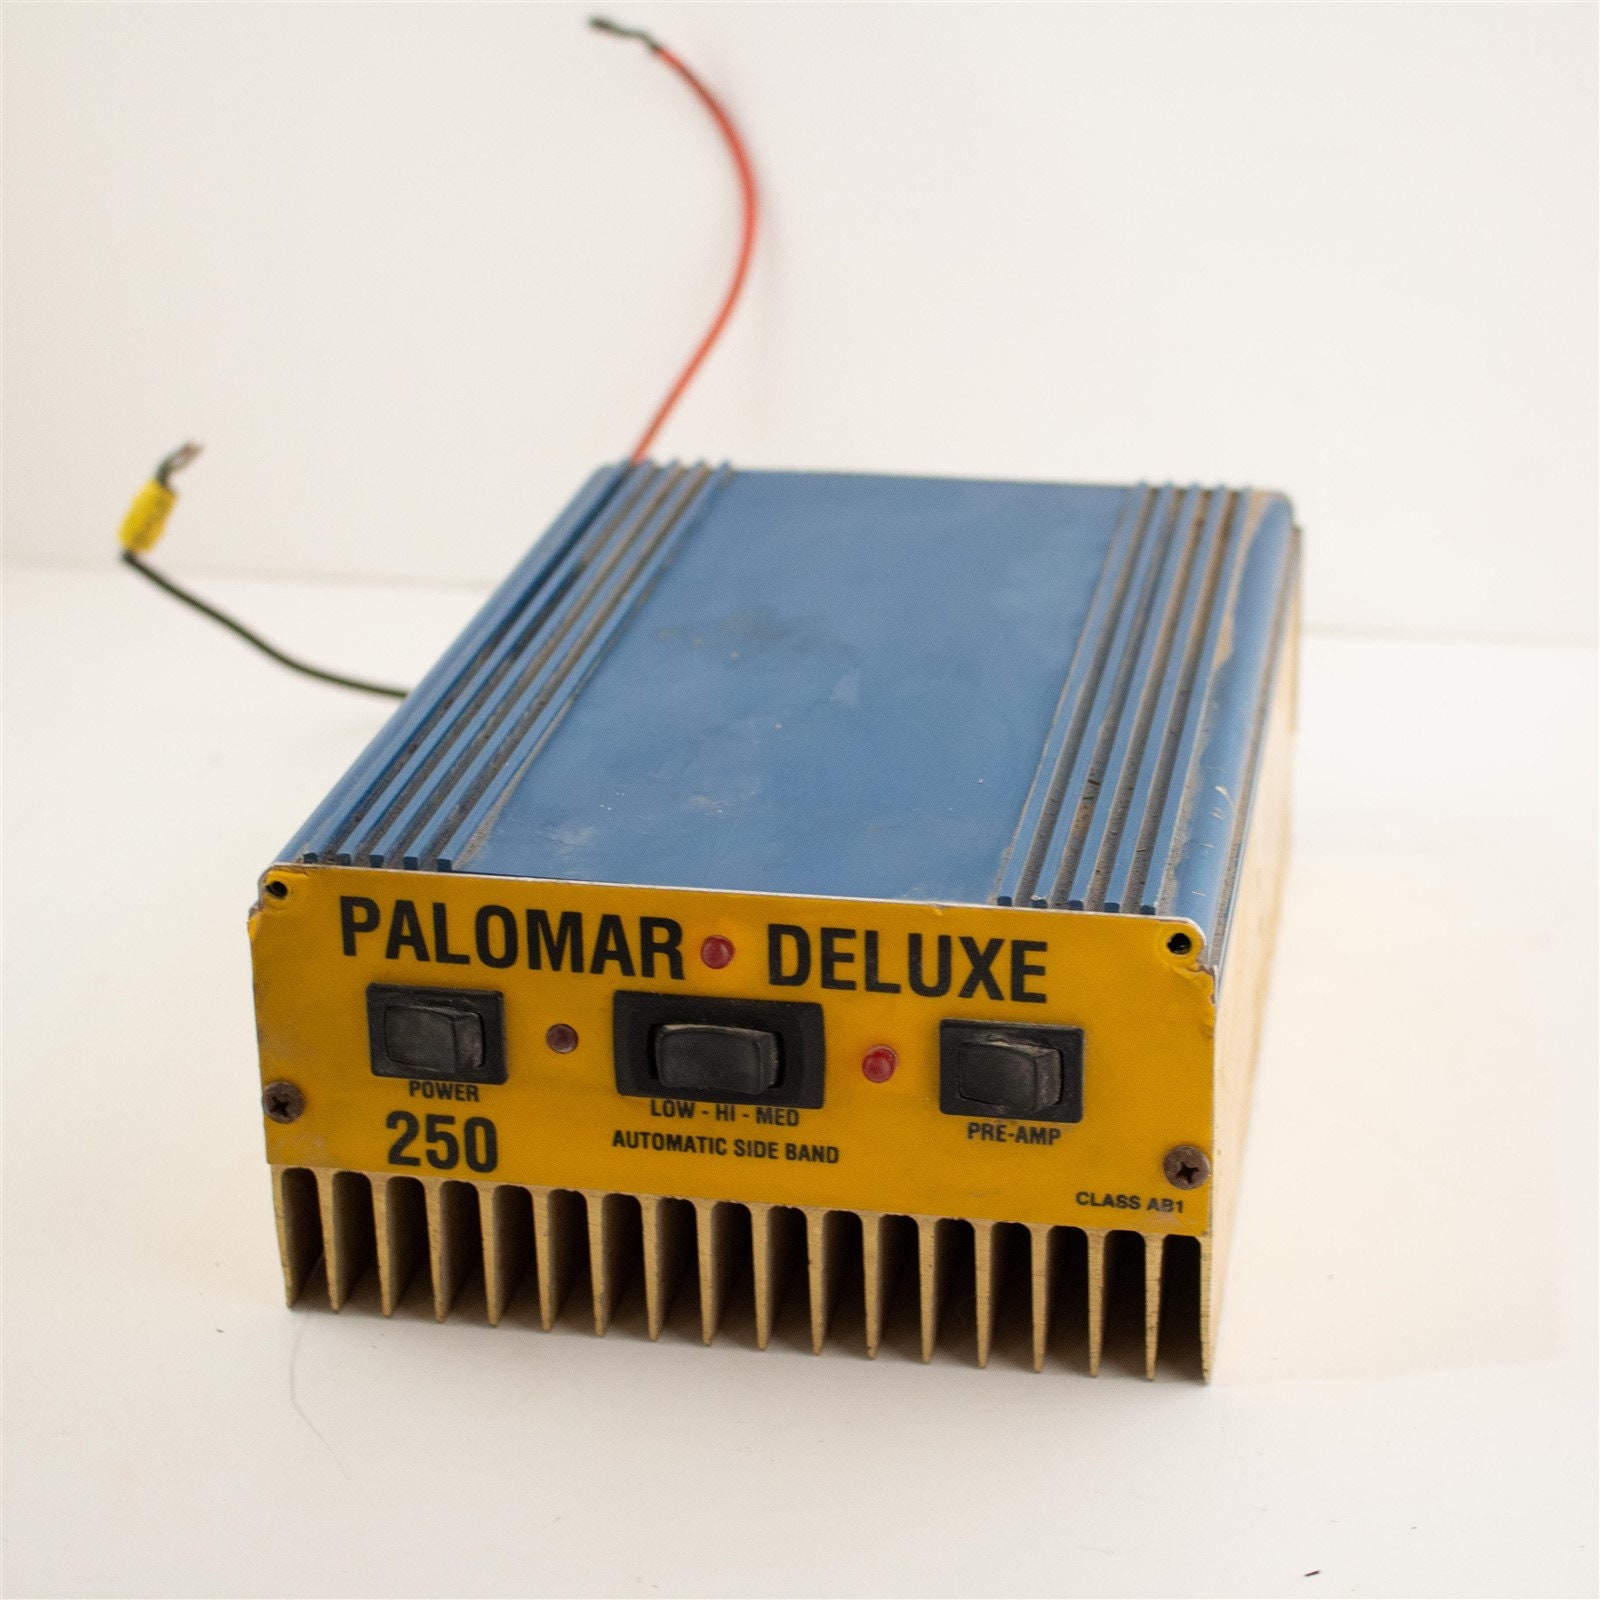 Palomar Deluxe 250 Linear CB Amplifier powers Up hq picture